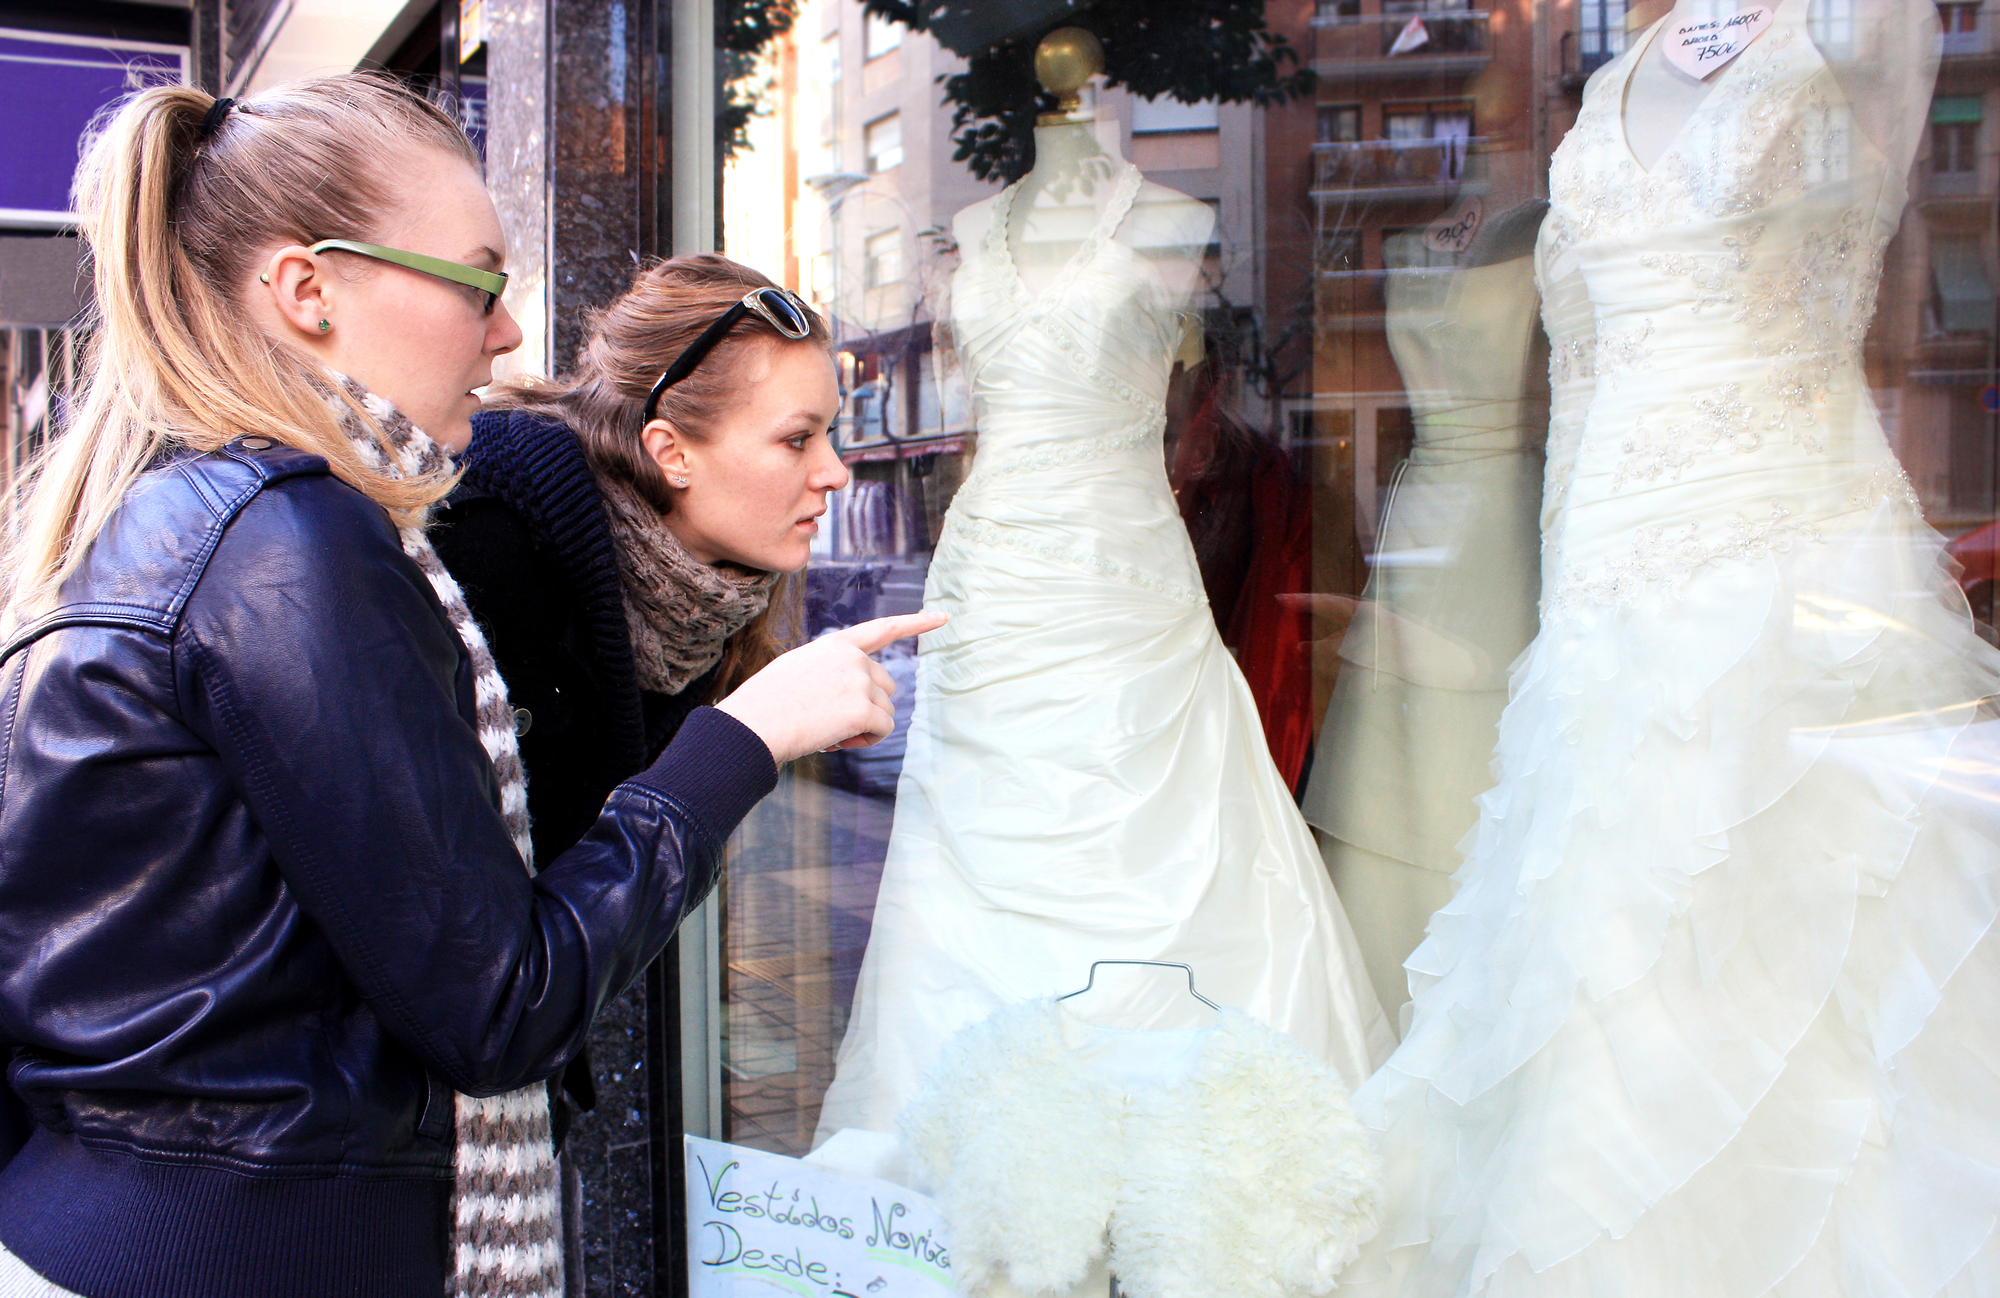 Re-Use, Recycle, Donate Wedding Dress